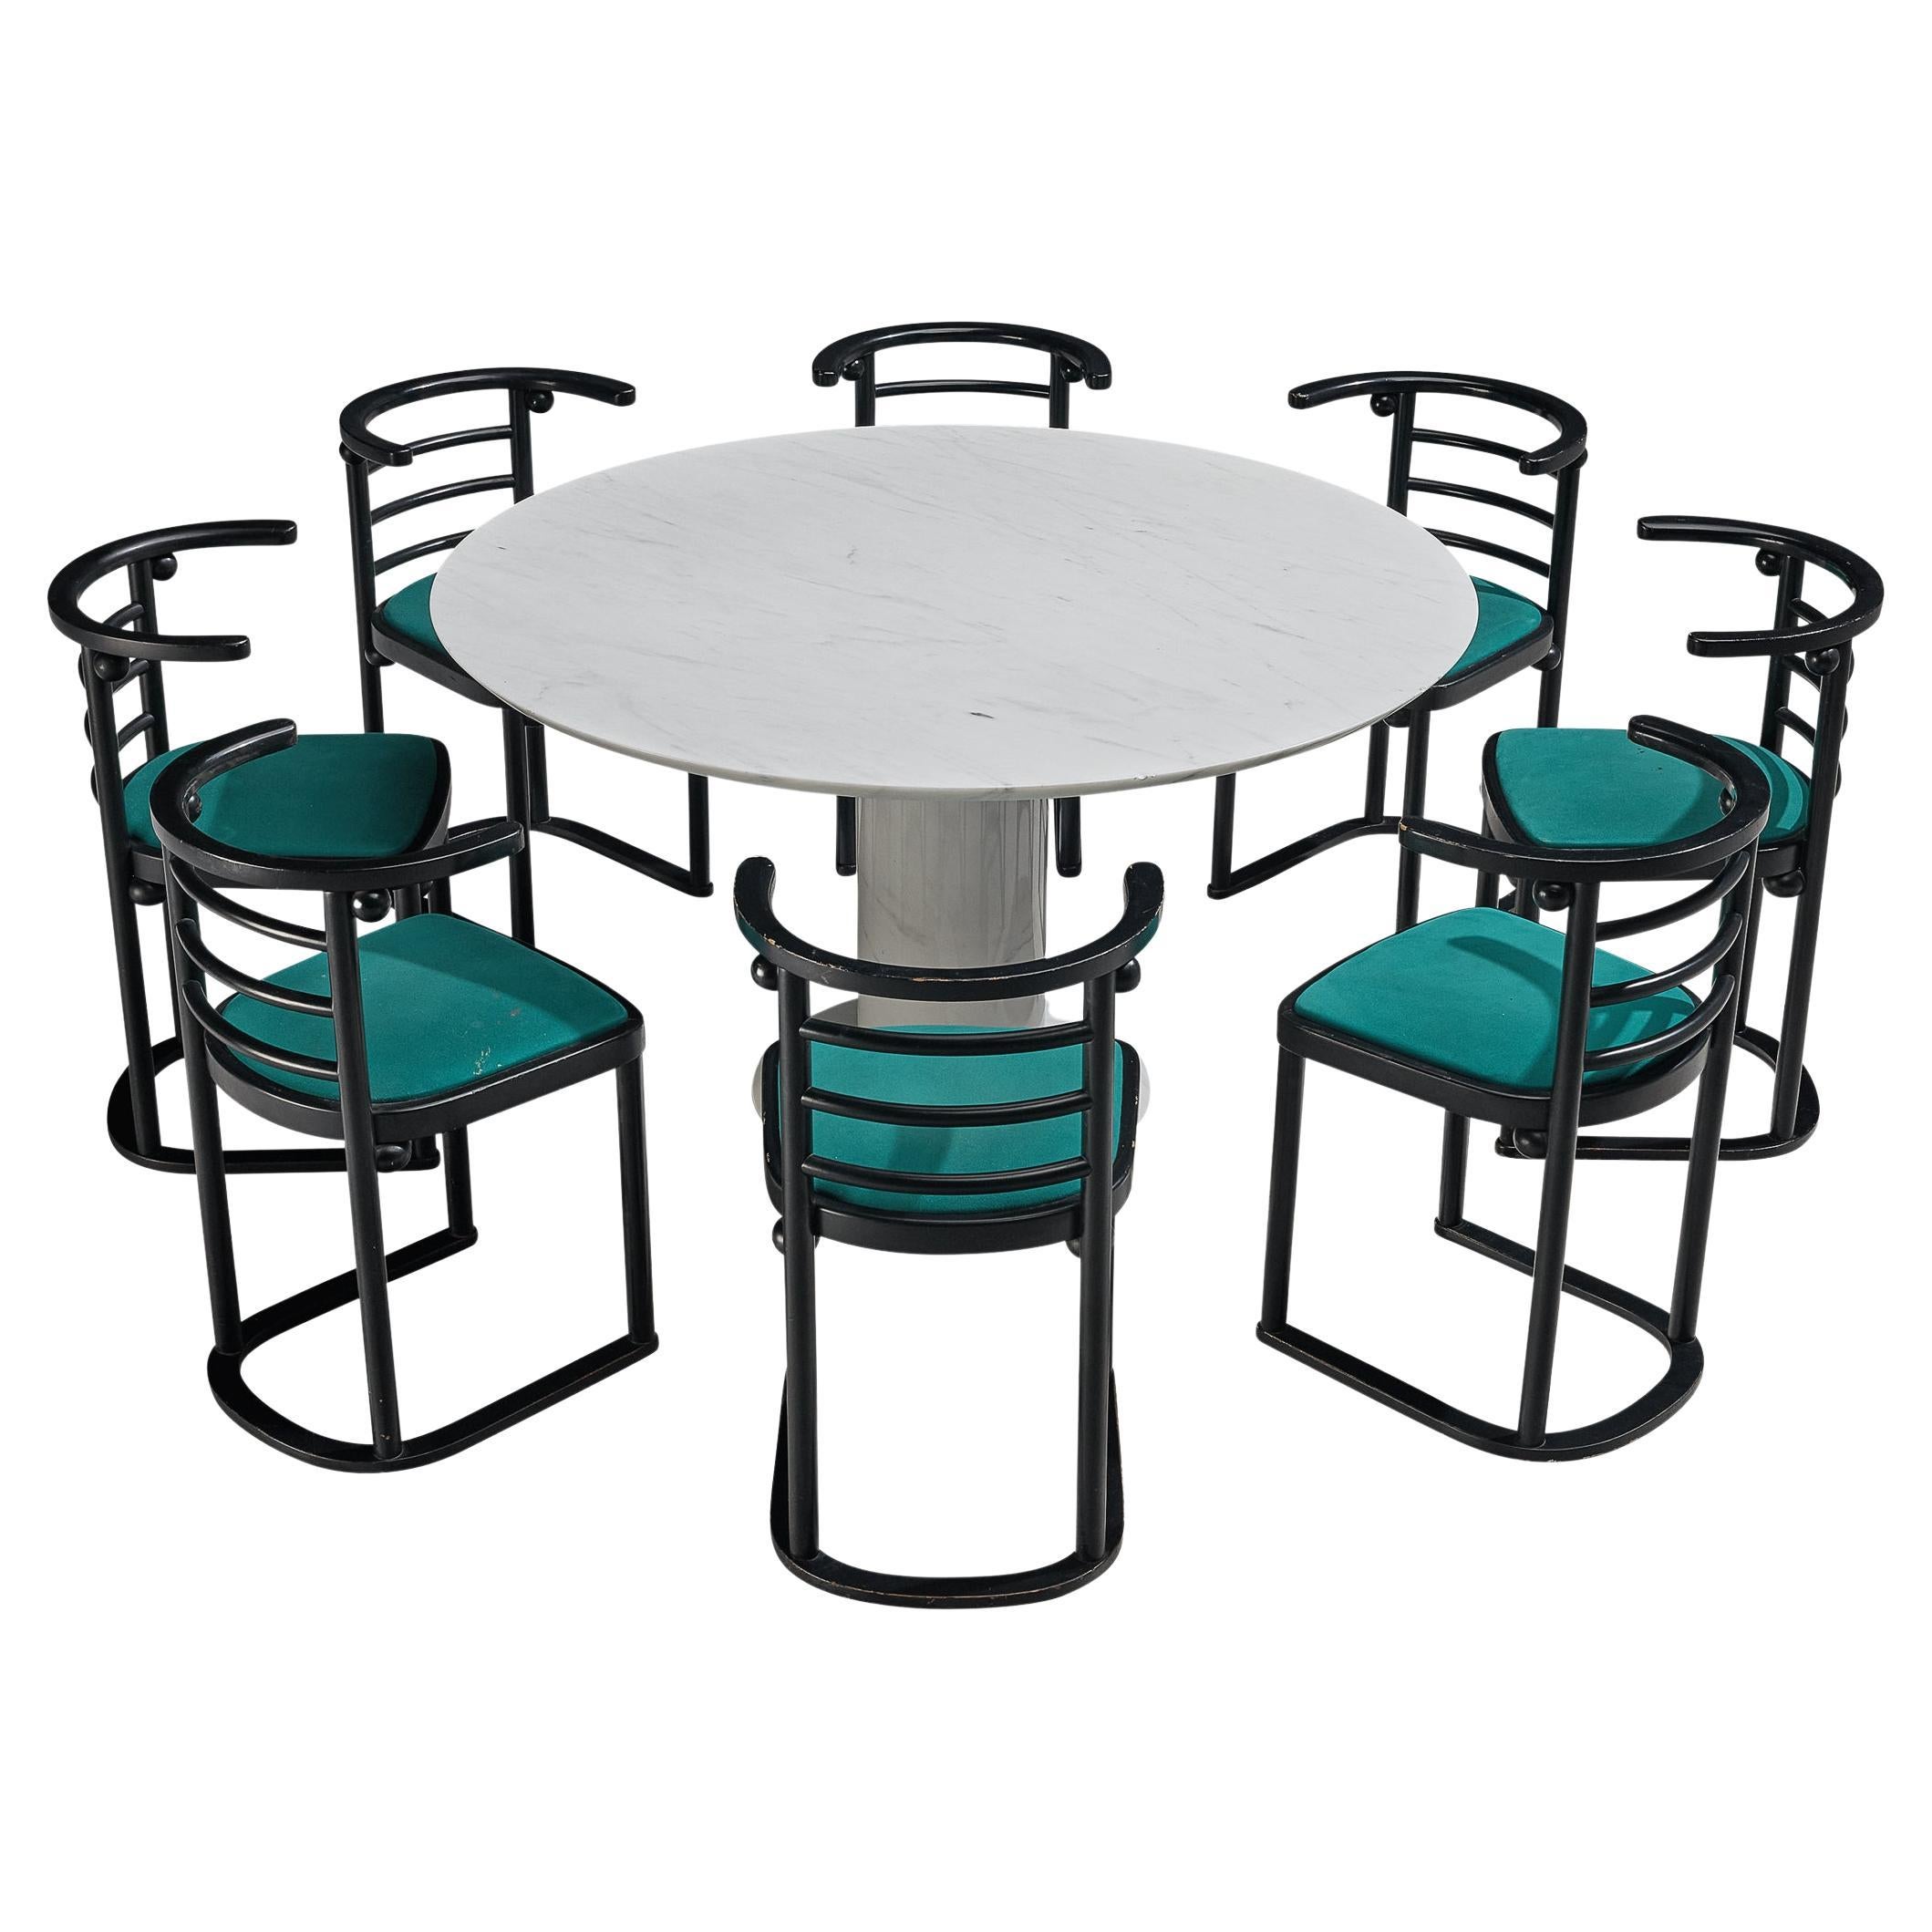 Set of a Round Marble Centre Table and Dining Chairs in Vivid Green Upholstery